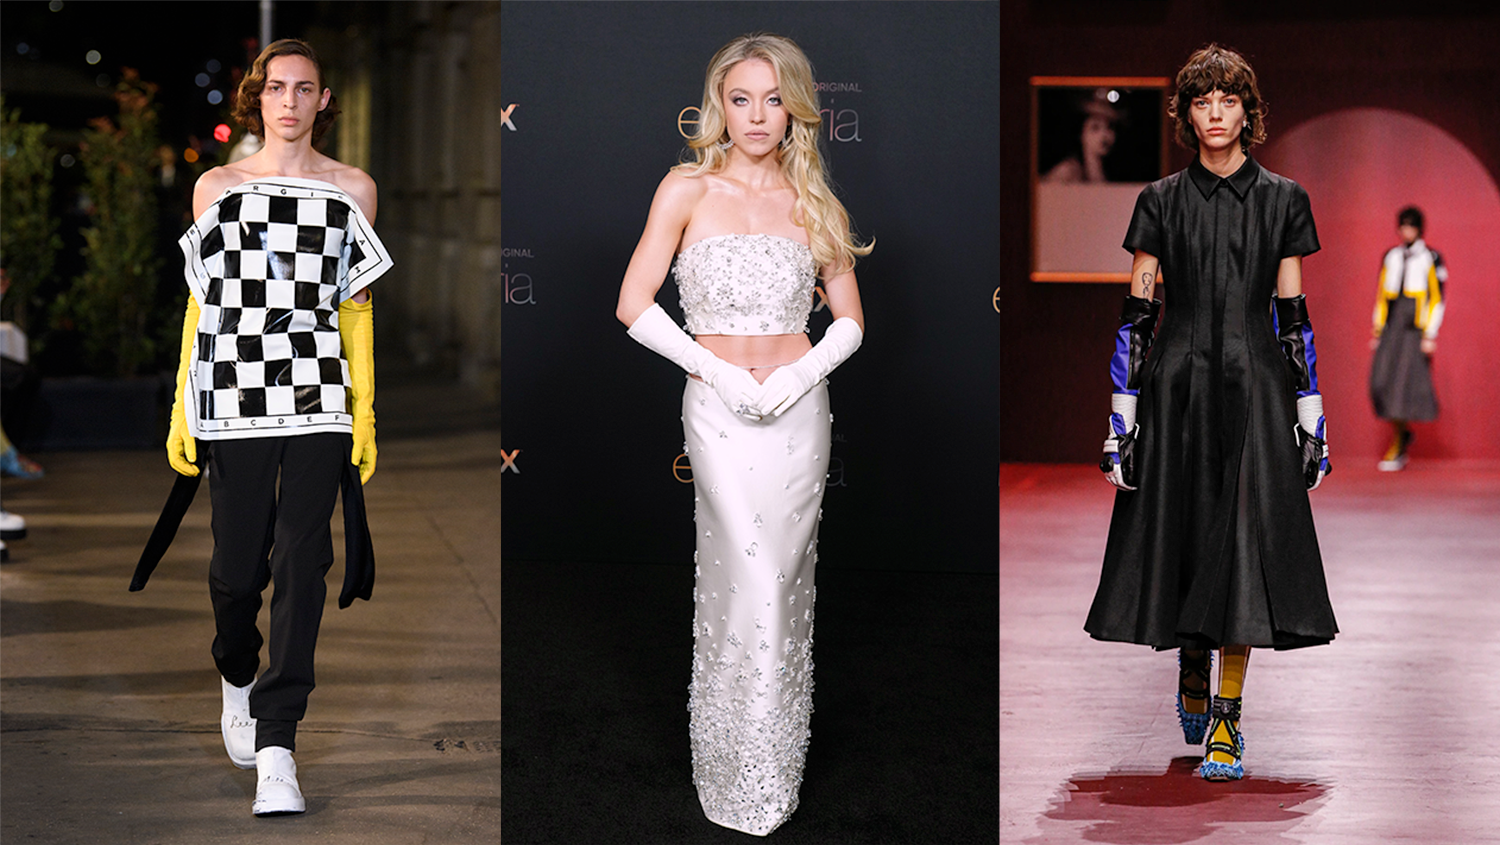 From high class to high camp why opera gloves are the latest it accessory